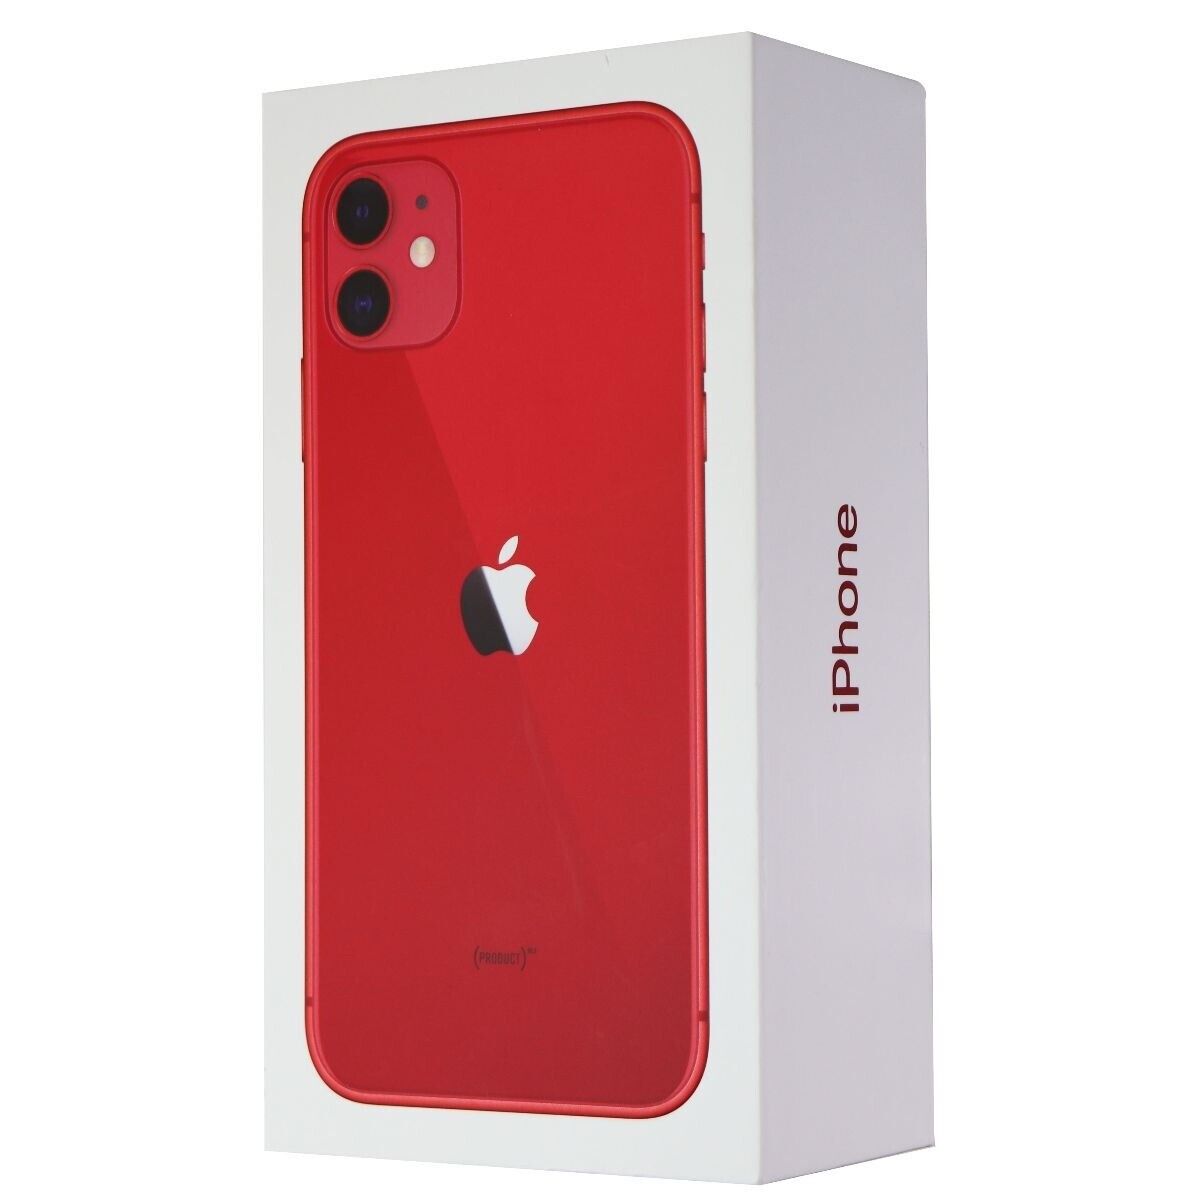 iPhone 11 128gb Product Red BOX ONLY